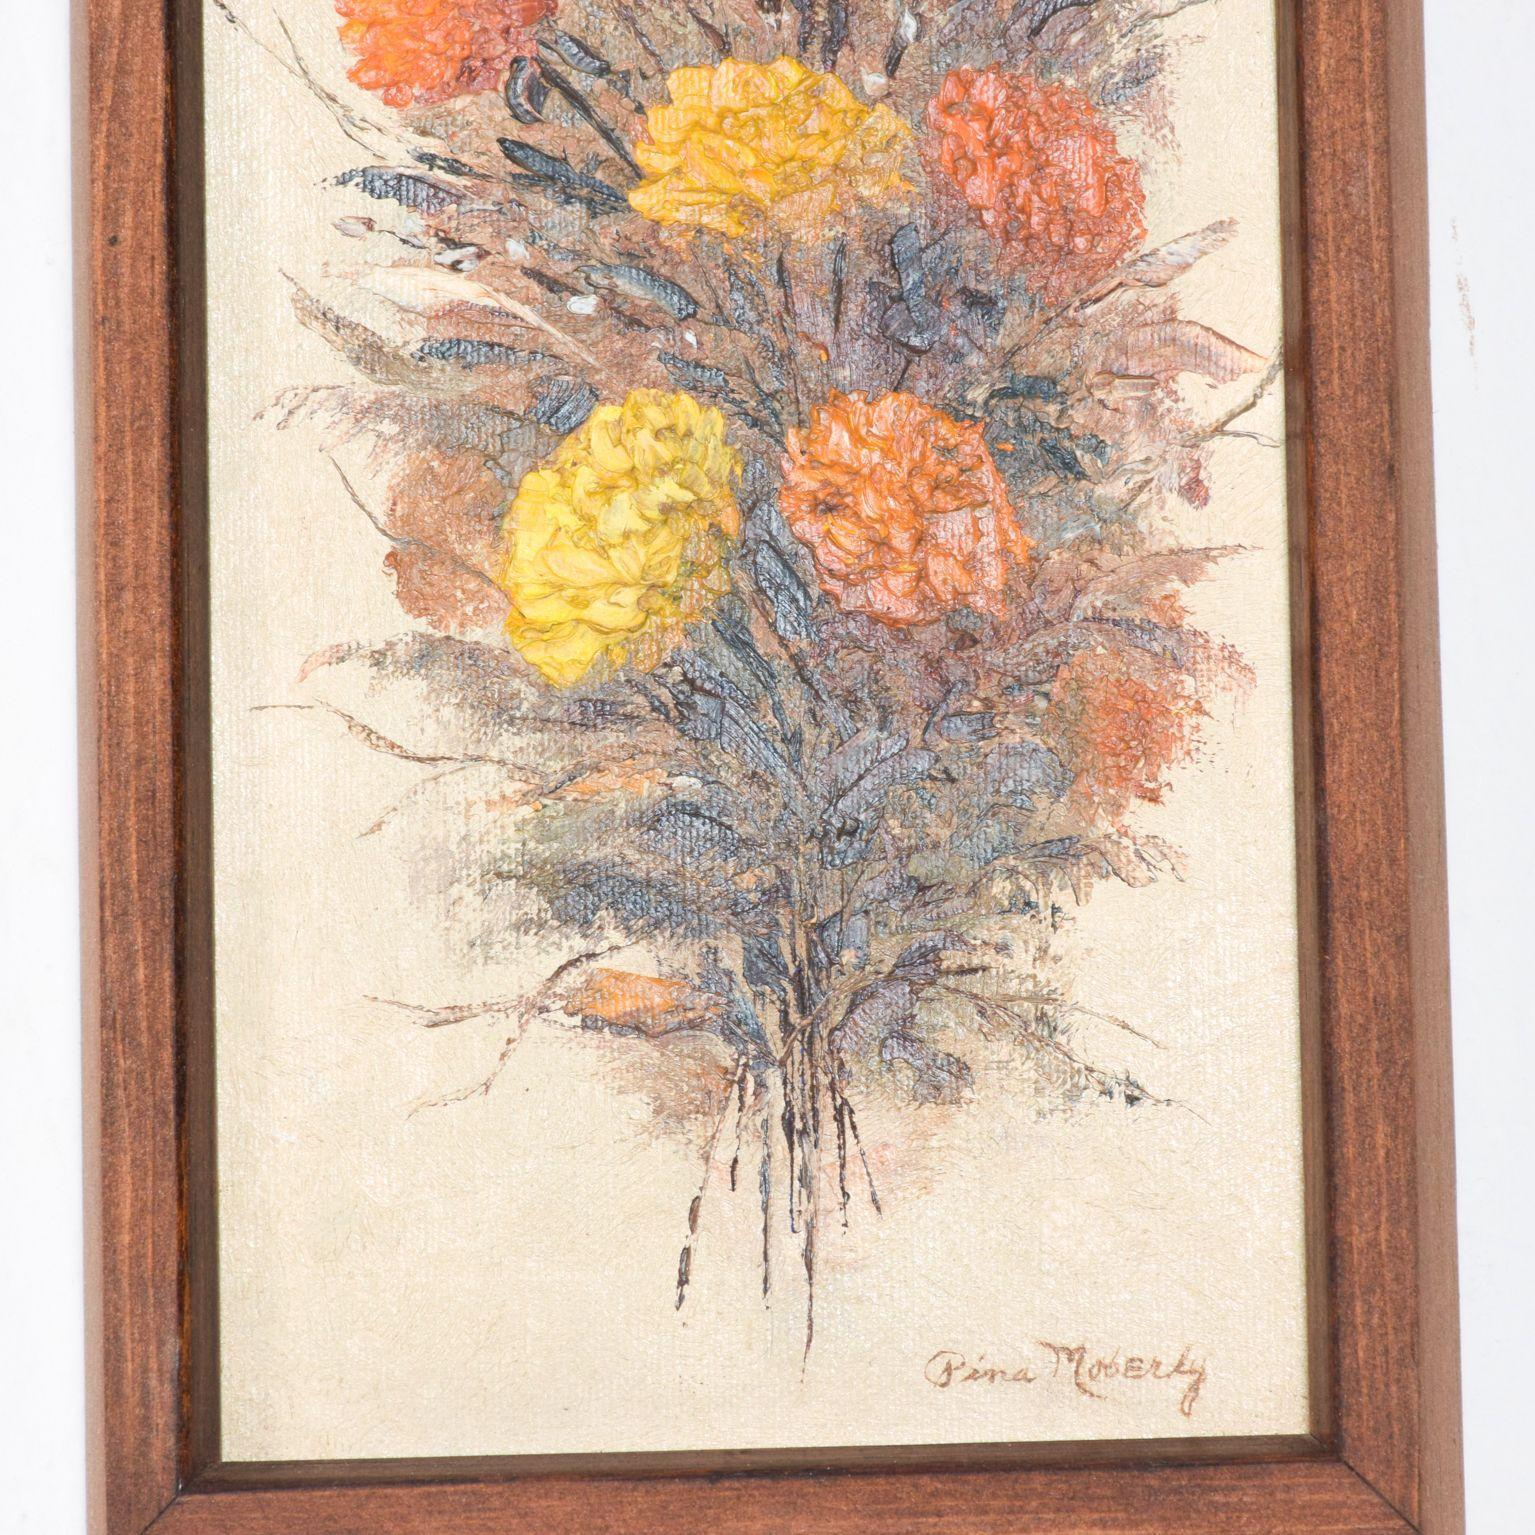 AMBIANIC presents
Signed Artwork, Set of Two Paintings by artist Pina Moberly
Mid Century Modern1960s
Yellow Orange Floral Bouquet Wood Frame.
13 x 7 x 1.25
Original unrestored vintage preowned condition.
See images please.